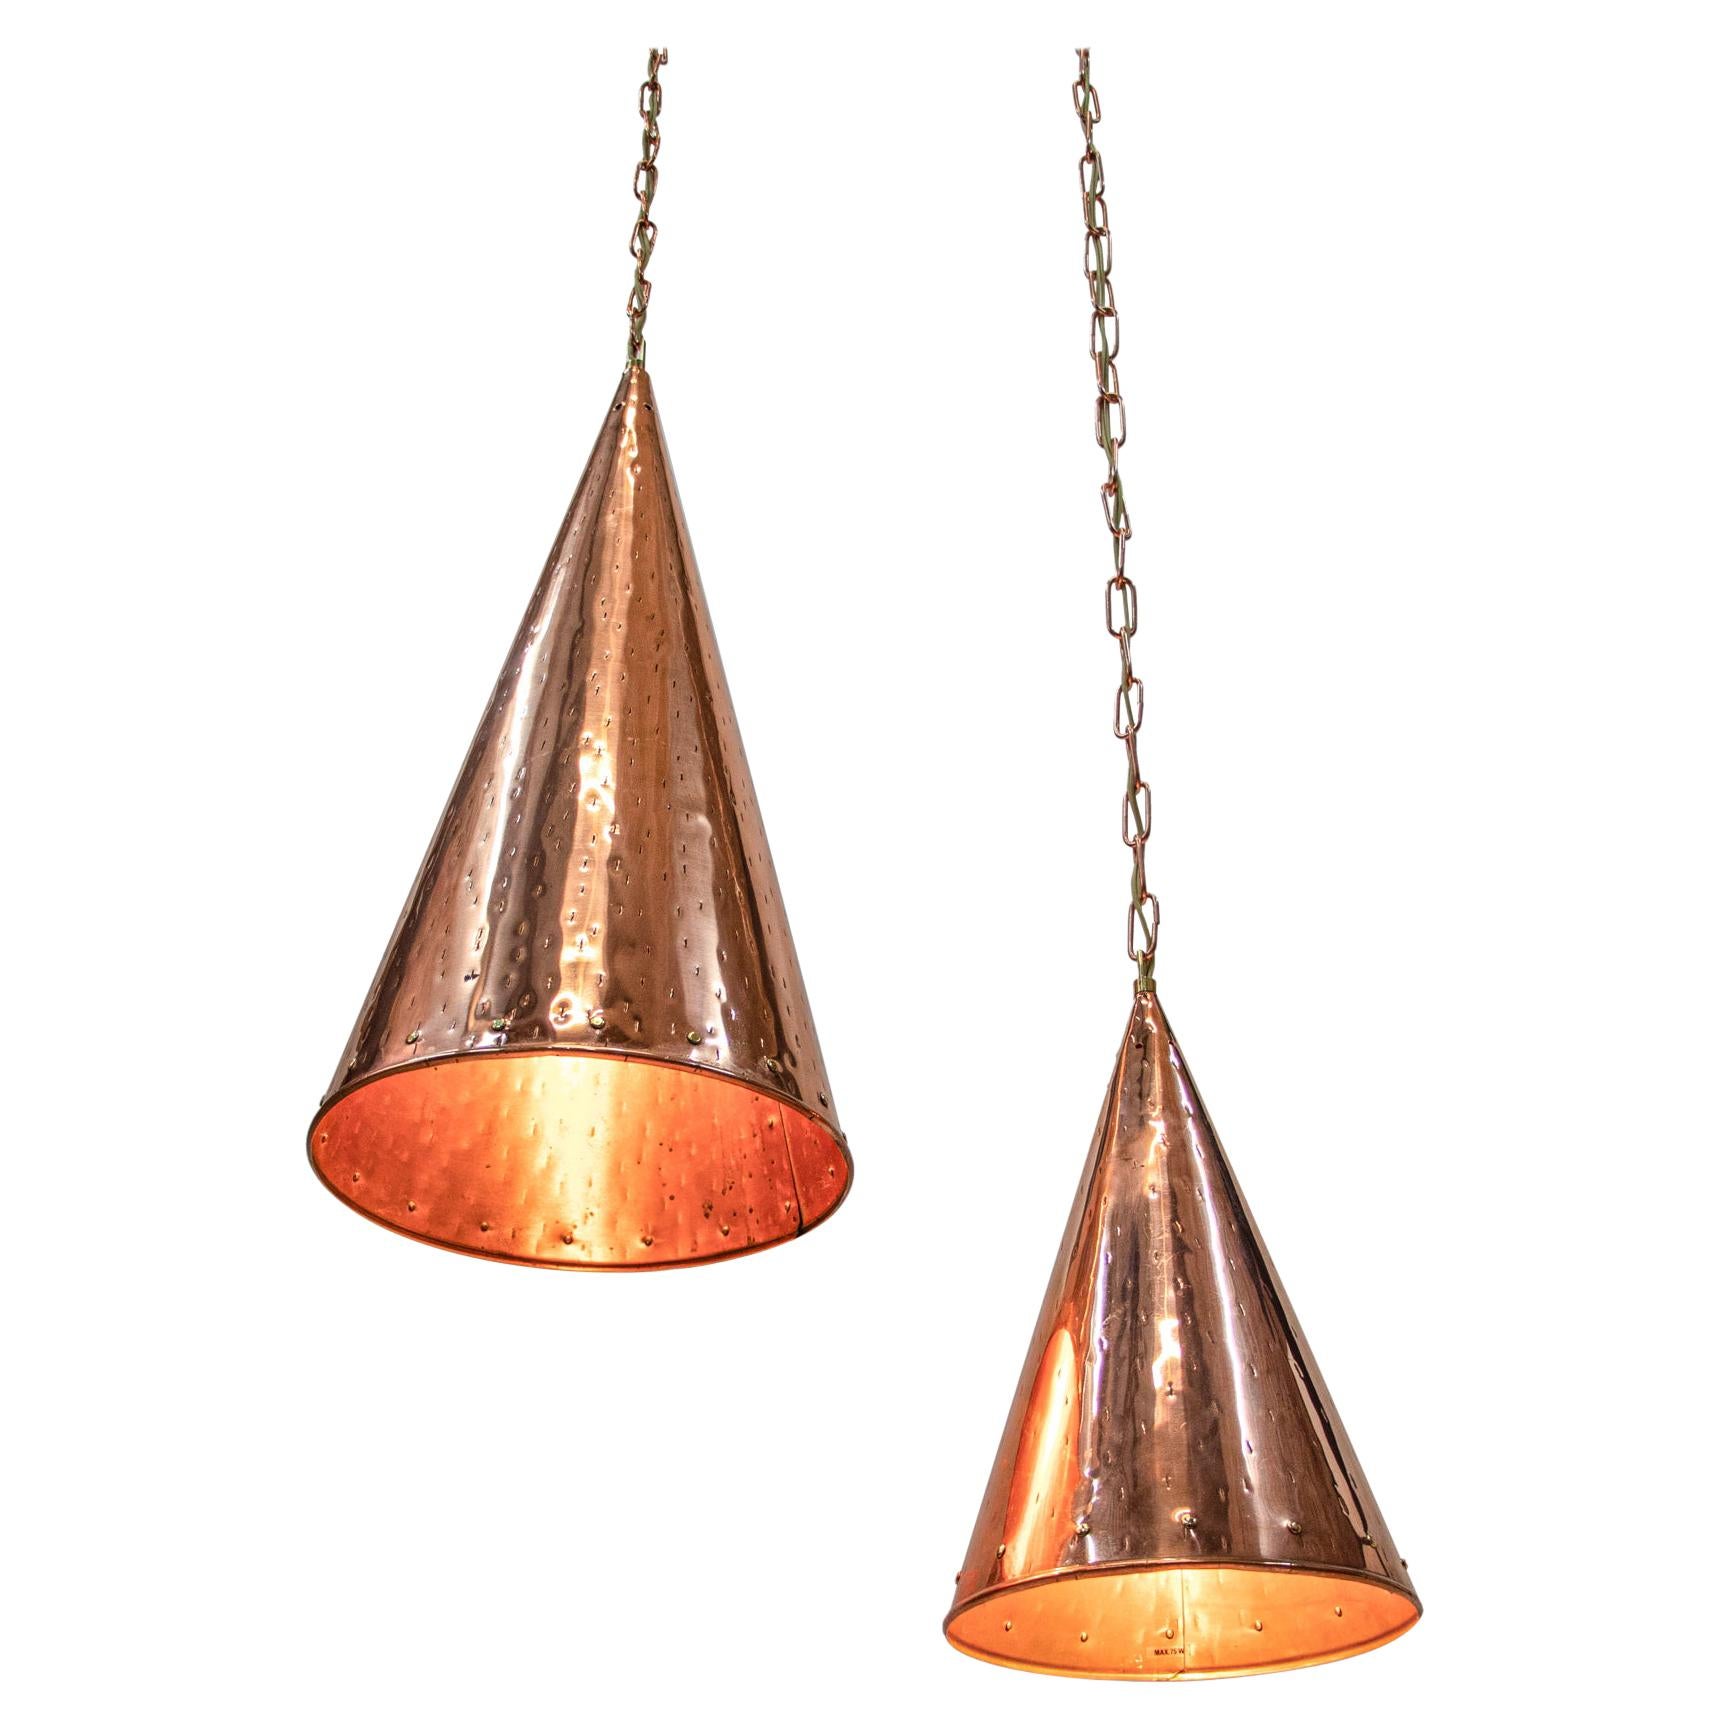 Pair of Danish Hammered Copper Cone Pendant Lamps by E.S Horn Aalestrup, 1950s For Sale